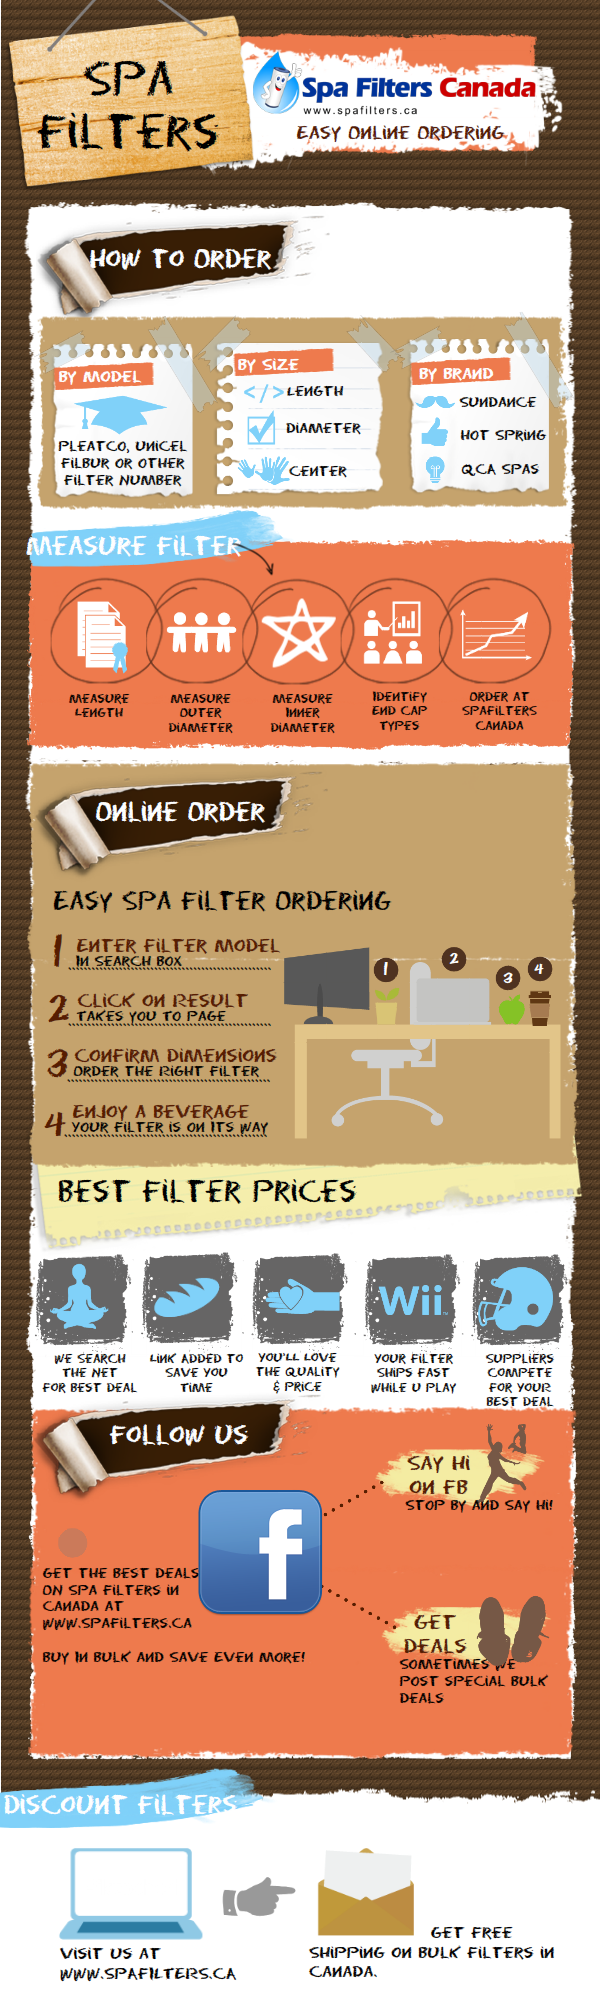 Spa Filters Canada online hot tub filter ordering